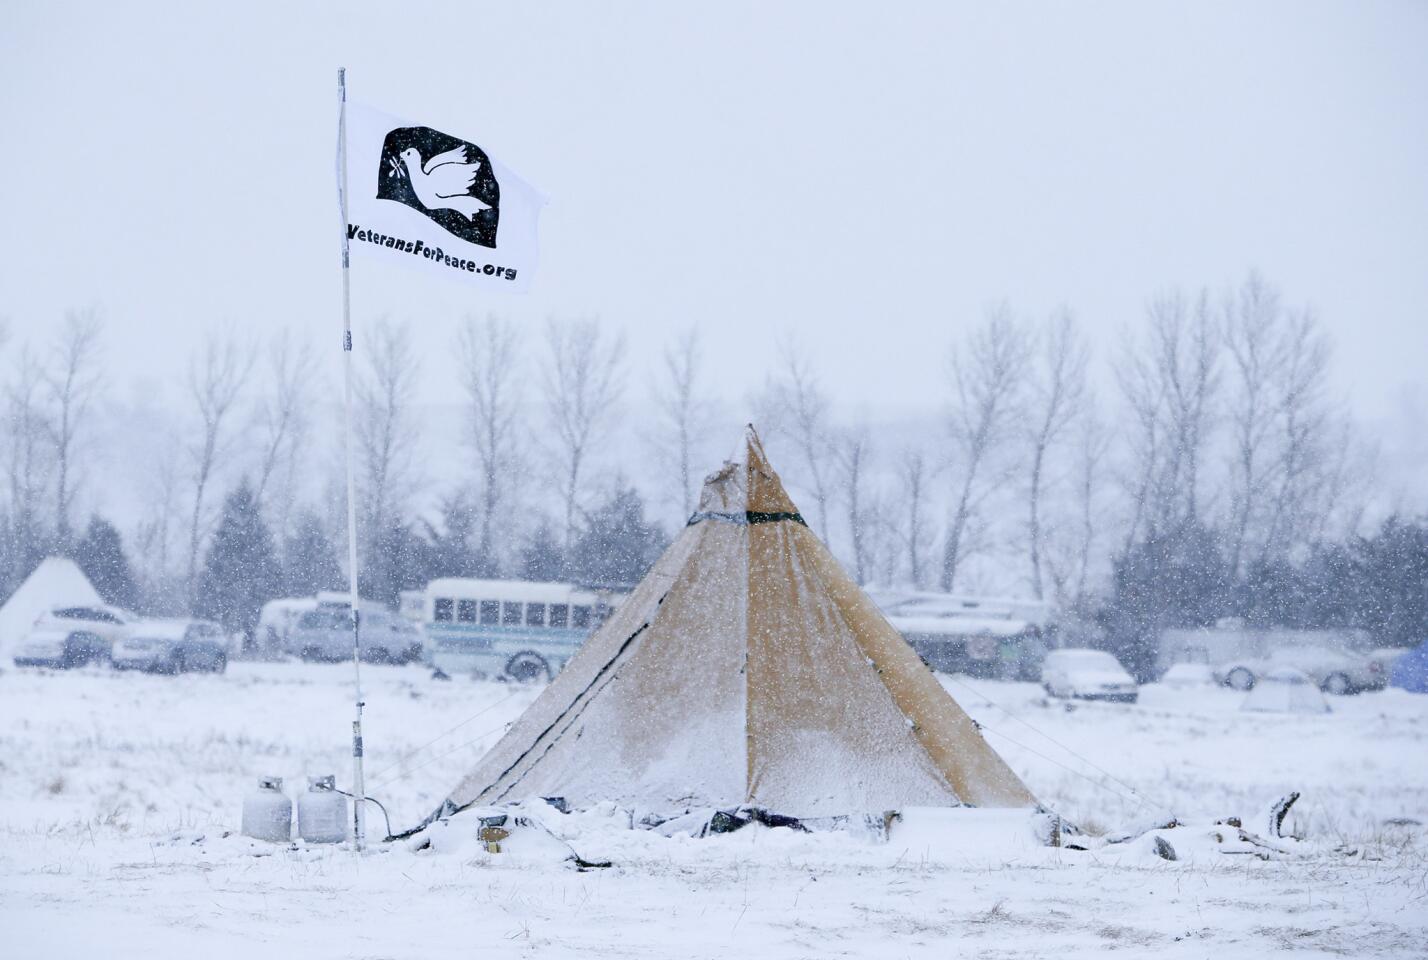 Heavy snow and low temperatures have come to the Oceti Sakowin Camp on the edge of North Dakota's Cannonball River just north of the Standing Rock Sioux Reservation.